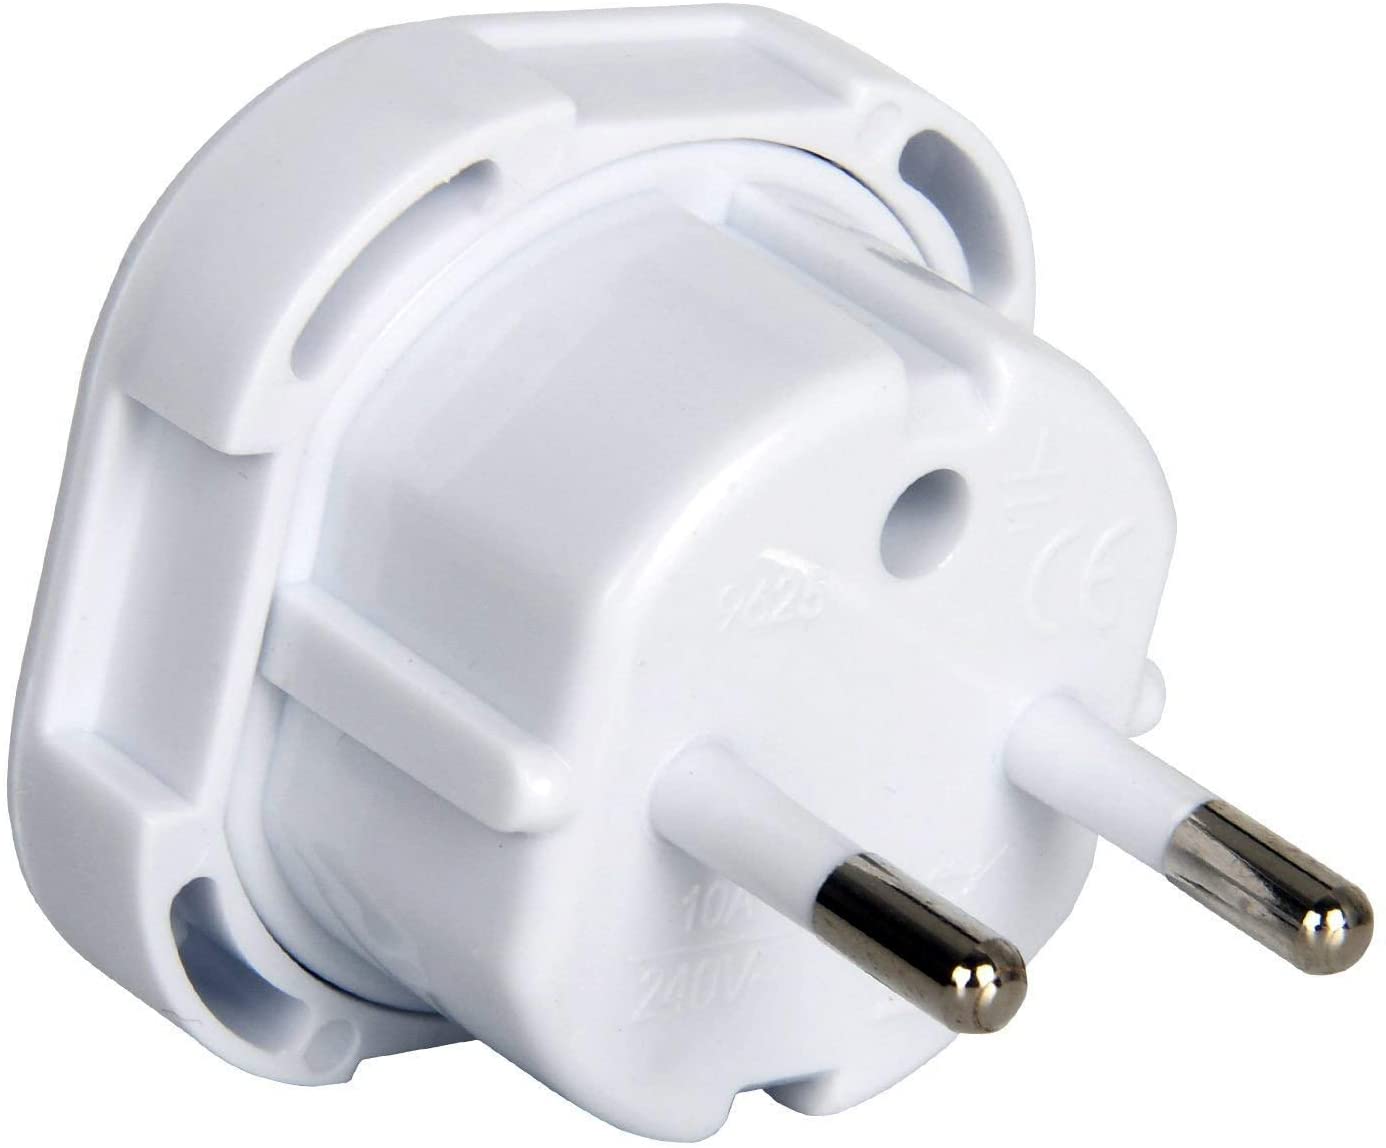 What Type Of Adapter Do I Need For Spain